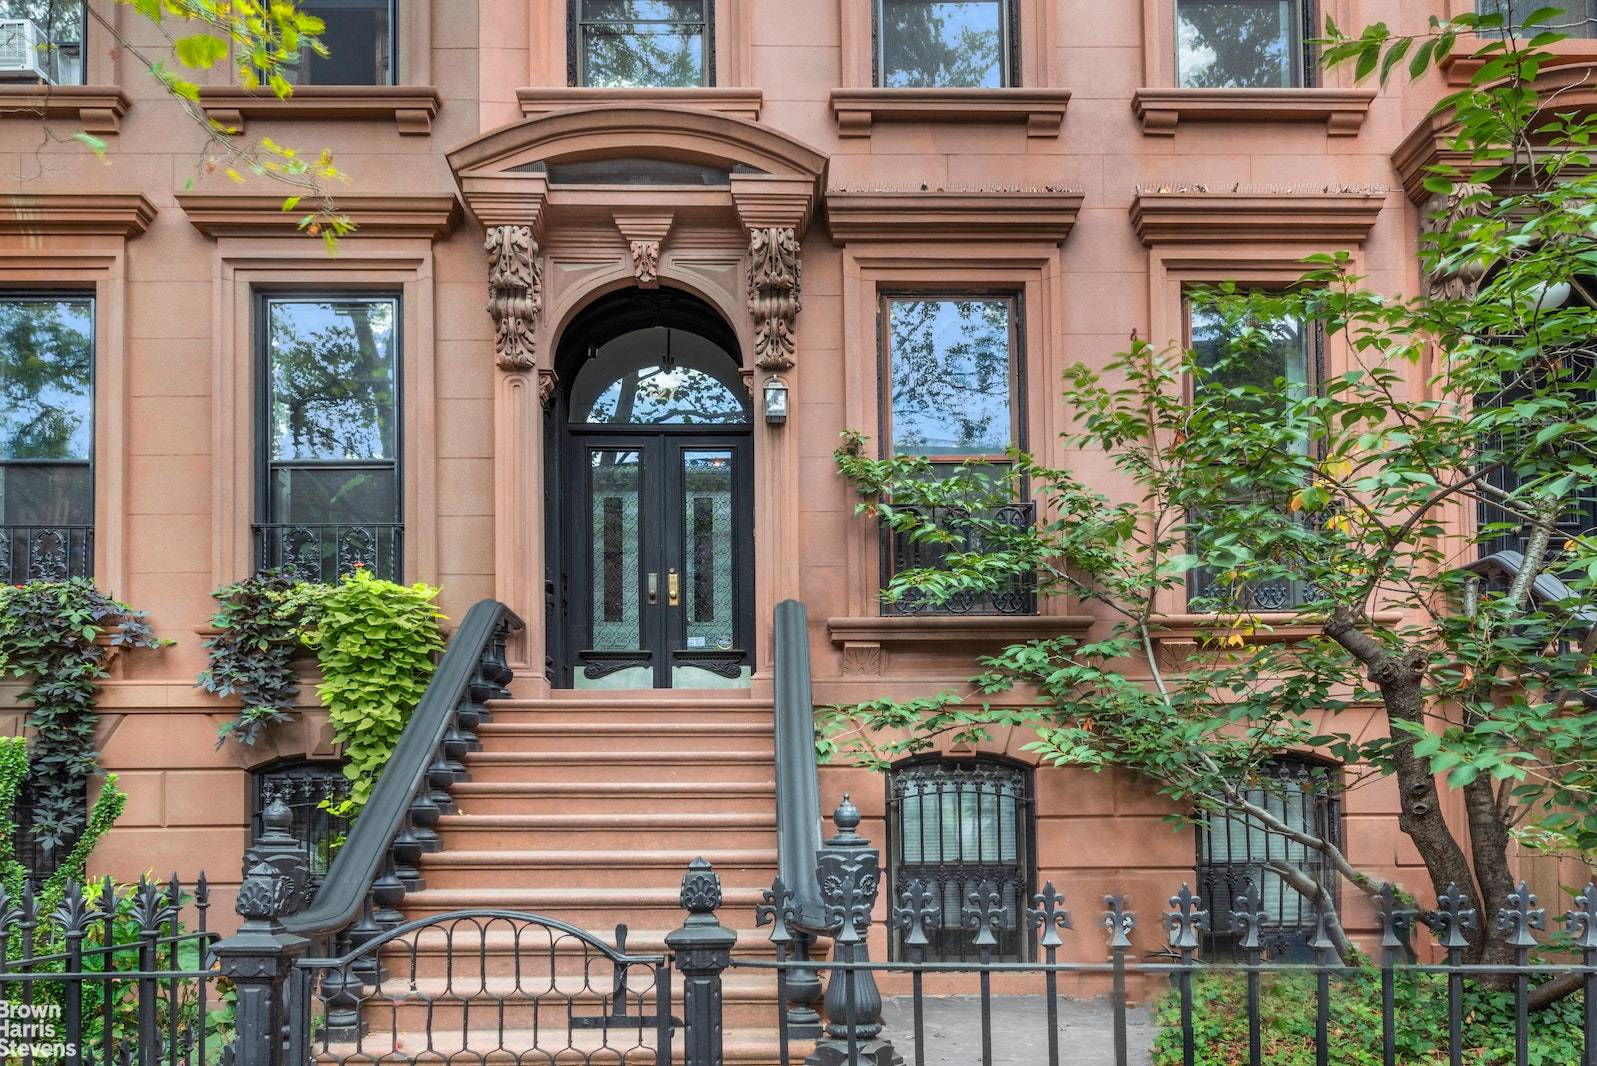 127 Park Place, Apt 1 Brownstone Duplex Patio Garden amp ; Fully Convertible BasementA rare opportunity with so much to offer Welcome Home to this restored, charming brownstone duplex, located ...